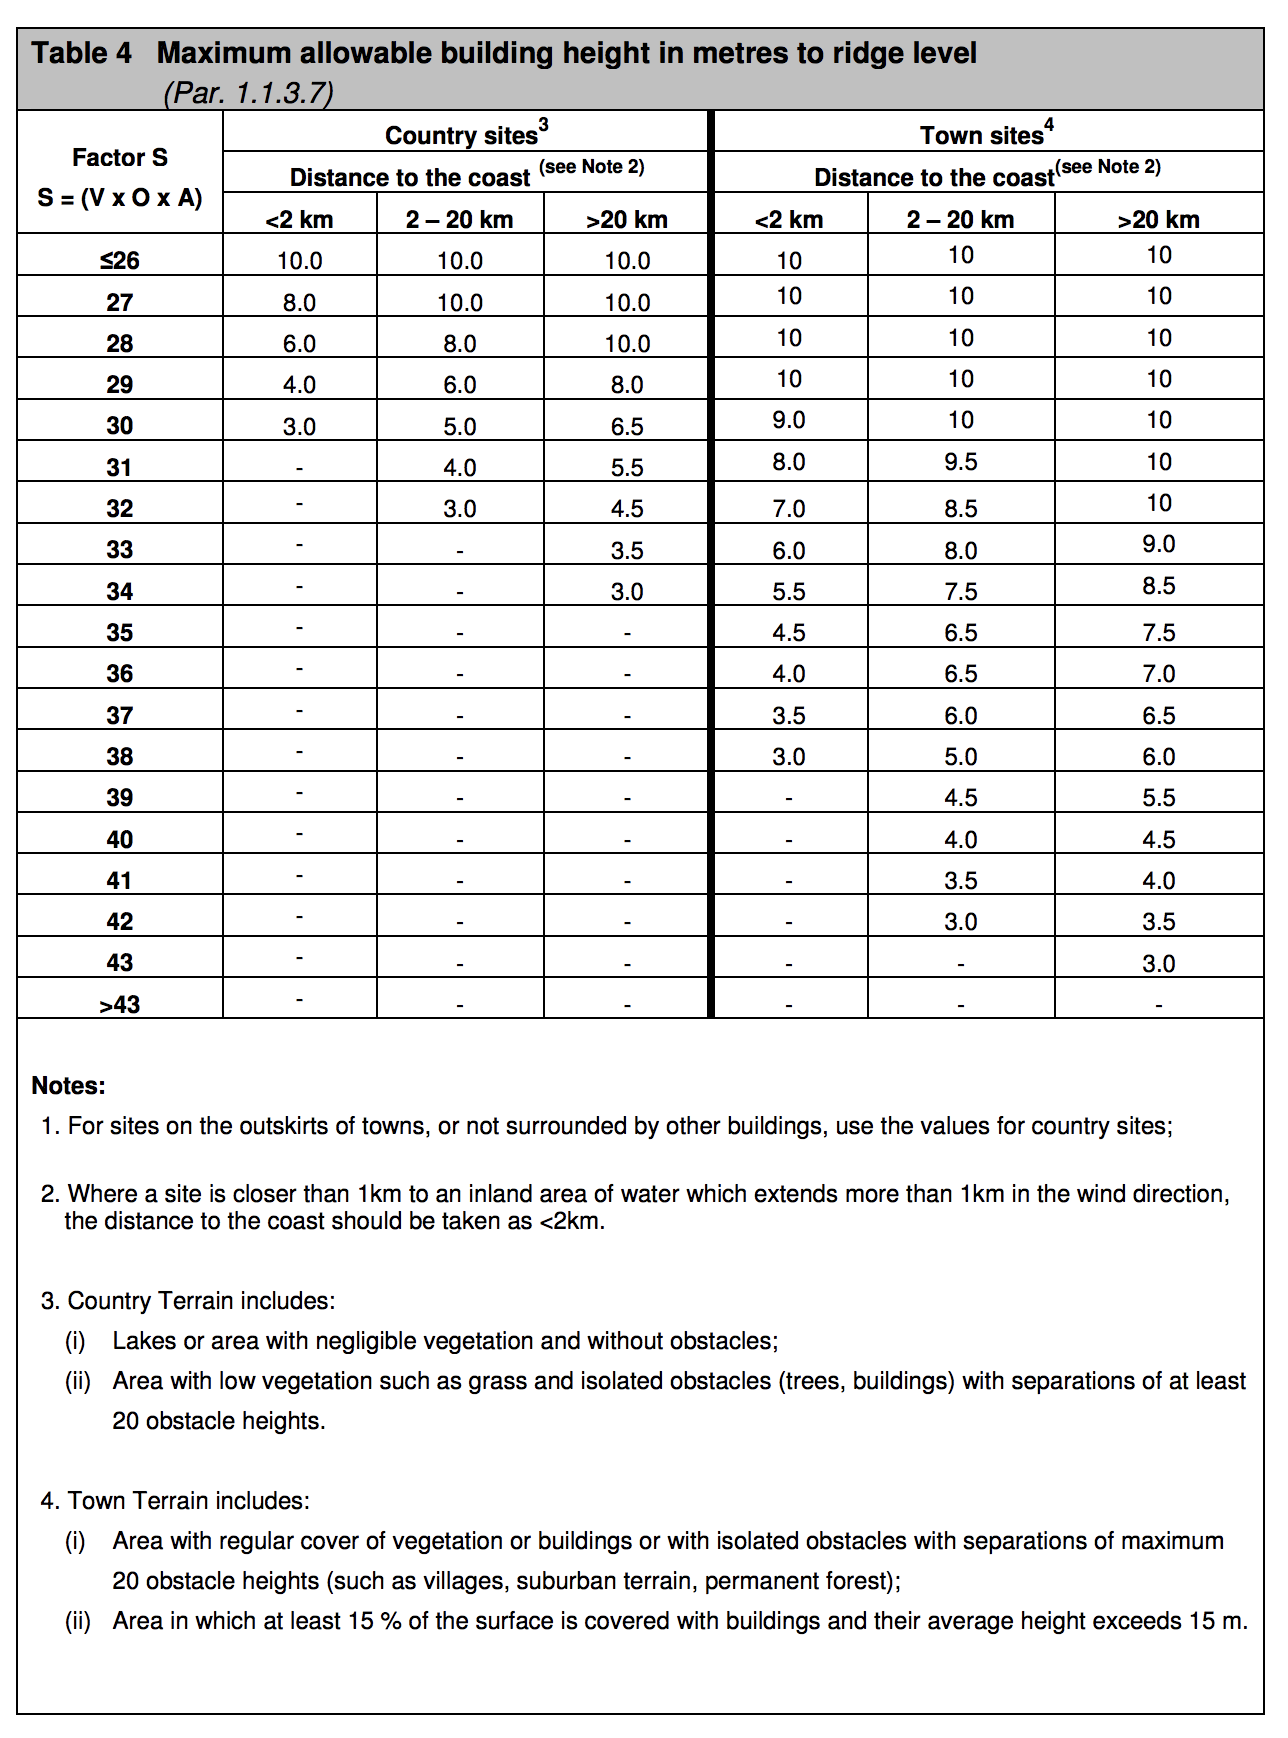 Table HA4 - Maximum allowable building height in metres to ridge level - Extract from TGD A